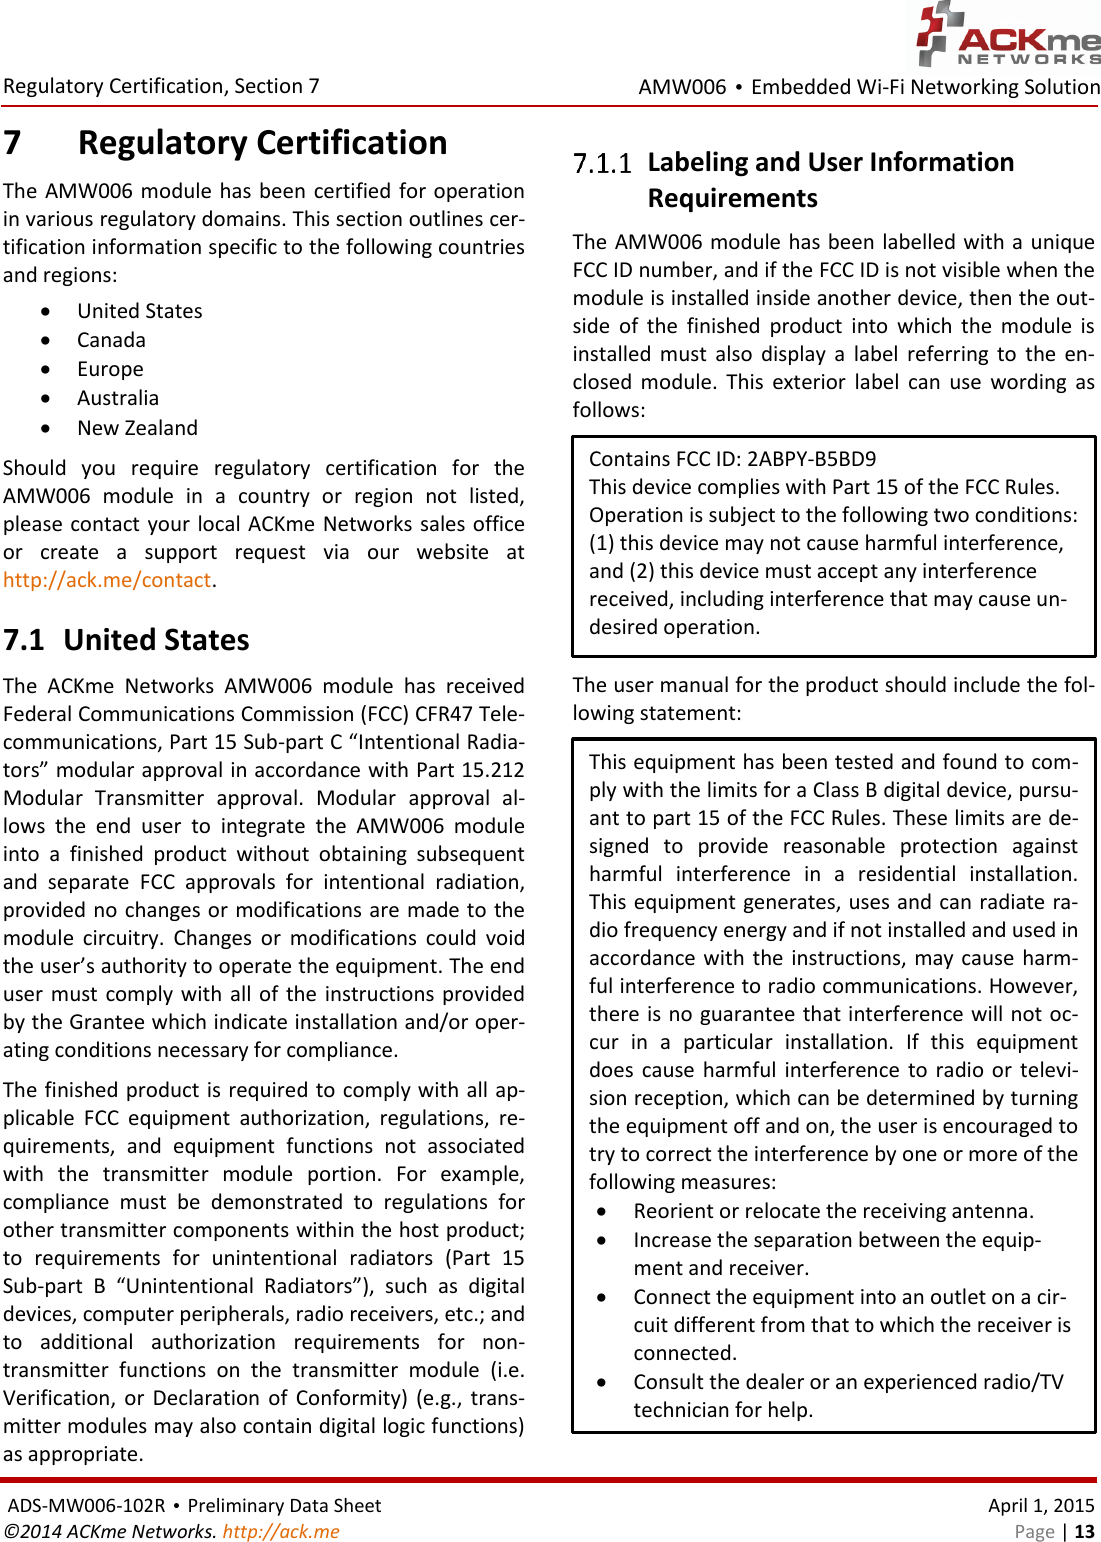 AMW006 • Embedded Wi-Fi Networking Solution  Regulatory Certification, Section 7  ADS-MW006-102R • Preliminary Data Sheet    April 1, 2015 ©2014 ACKme Networks. http://ack.me    Page | 13 7 Regulatory Certification The AMW006 module  has been  certified for operation in various regulatory domains. This section outlines cer-tification information specific to the following countries and regions:  United States  Canada  Europe  Australia  New Zealand Should  you  require  regulatory  certification  for  the AMW006  module  in  a  country  or  region  not  listed, please contact your local ACKme Networks sales office or  create  a  support  request  via  our  website  at  http://ack.me/contact.  7.1 United States The  ACKme  Networks  AMW006  module  has  received Federal Communications Commission (FCC) CFR47 Tele-communications, Part 15 Sub-part C “Intentional Radia-tors” modular approval in accordance with Part 15.212 Modular  Transmitter  approval.  Modular  approval  al-lows  the  end  user  to  integrate  the  AMW006  module into  a  finished  product  without  obtaining  subsequent and  separate  FCC  approvals  for  intentional  radiation, provided no changes or modifications are made to the module  circuitry.  Changes  or  modifications  could  void the user’s authority to operate the equipment. The end user must comply with all of the instructions provided by the Grantee which indicate installation and/or oper-ating conditions necessary for compliance. The finished product is required to comply with all ap-plicable  FCC  equipment  authorization,  regulations,  re-quirements,  and  equipment  functions  not  associated with  the  transmitter  module  portion.  For  example, compliance  must  be  demonstrated  to  regulations  for other transmitter components within the host product; to  requirements  for  unintentional  radiators  (Part  15 Sub-part  B  “Unintentional  Radiators”),  such  as  digital devices, computer peripherals, radio receivers, etc.; and to  additional  authorization  requirements  for  non-transmitter  functions  on  the  transmitter  module  (i.e. Verification,  or  Declaration  of  Conformity) (e.g.,  trans-mitter modules may also contain digital logic functions) as appropriate.  Labeling and User Information  Requirements The AMW006 module has been labelled with a unique FCC ID number, and if the FCC ID is not visible when the module is installed inside another device, then the out-side  of  the  finished  product  into  which  the  module  is installed  must  also  display  a  label  referring  to  the  en-closed  module.  This  exterior  label  can  use  wording  as follows:  The user manual for the product should include the fol-lowing statement:  Contains FCC ID: 2ABPY-B5BD9 This device complies with Part 15 of the FCC Rules. Operation is subject to the following two conditions: (1) this device may not cause harmful interference, and (2) this device must accept any interference received, including interference that may cause un-desired operation. This equipment has been tested and found to com-ply with the limits for a Class B digital device, pursu-ant to part 15 of the FCC Rules. These limits are de-signed  to  provide  reasonable  protection  against harmful  interference  in  a  residential  installation. This equipment generates, uses and can radiate ra-dio frequency energy and if not installed and used in accordance with the instructions, may cause harm-ful interference to radio communications. However, there is no guarantee that interference will not oc-cur  in  a  particular  installation.  If  this  equipment does  cause harmful  interference  to  radio  or  televi-sion reception, which can be determined by turning the equipment off and on, the user is encouraged to try to correct the interference by one or more of the following measures:  Reorient or relocate the receiving antenna.  Increase the separation between the equip-ment and receiver.  Connect the equipment into an outlet on a cir-cuit different from that to which the receiver is connected.  Consult the dealer or an experienced radio/TV technician for help. 